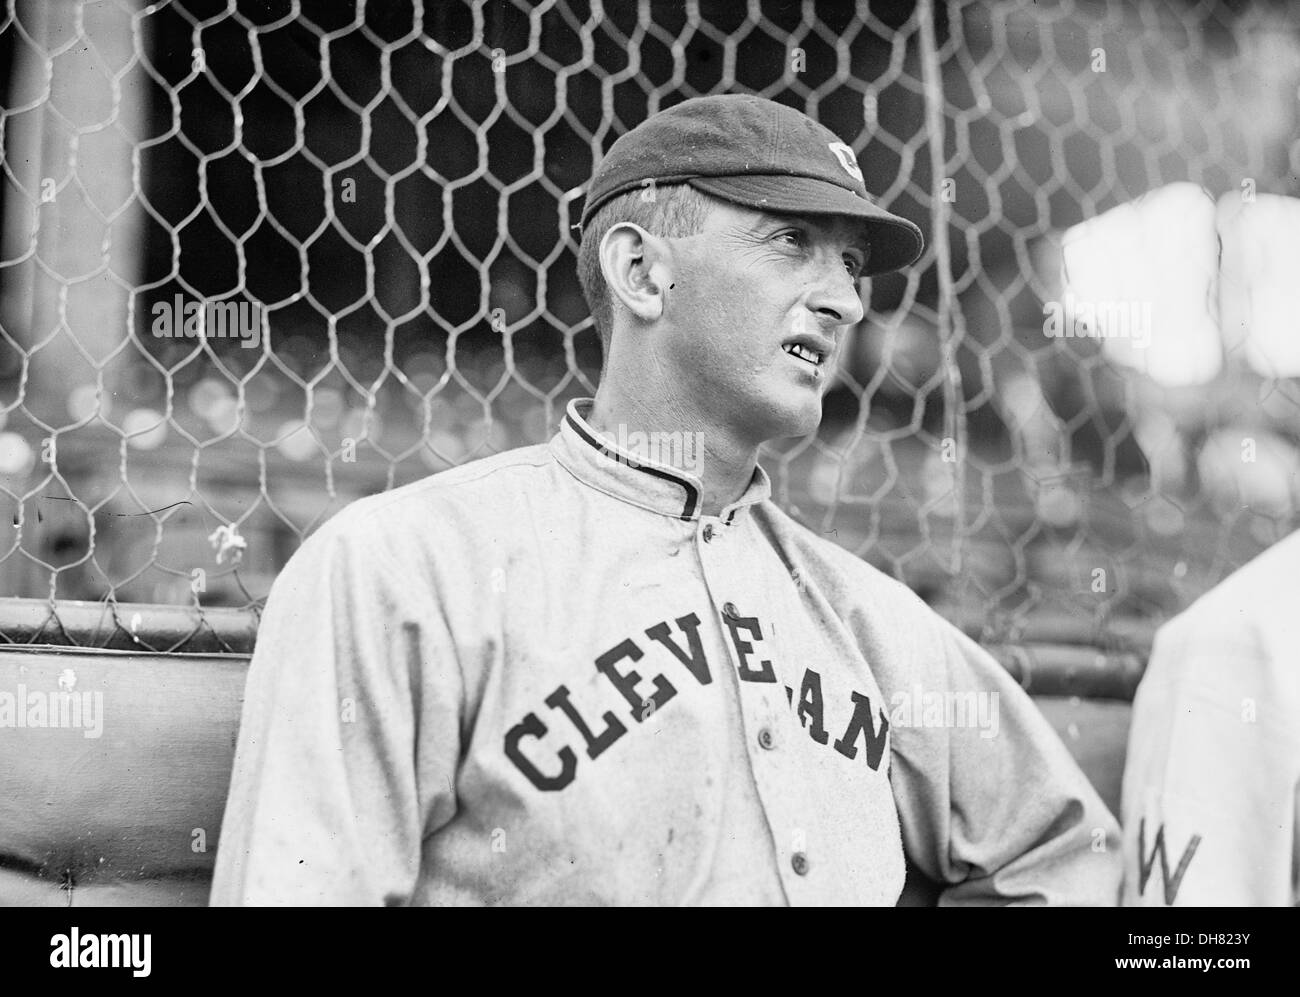 Top 100 Cleveland Indians: #10 Shoeless Joe Jackson - Covering the